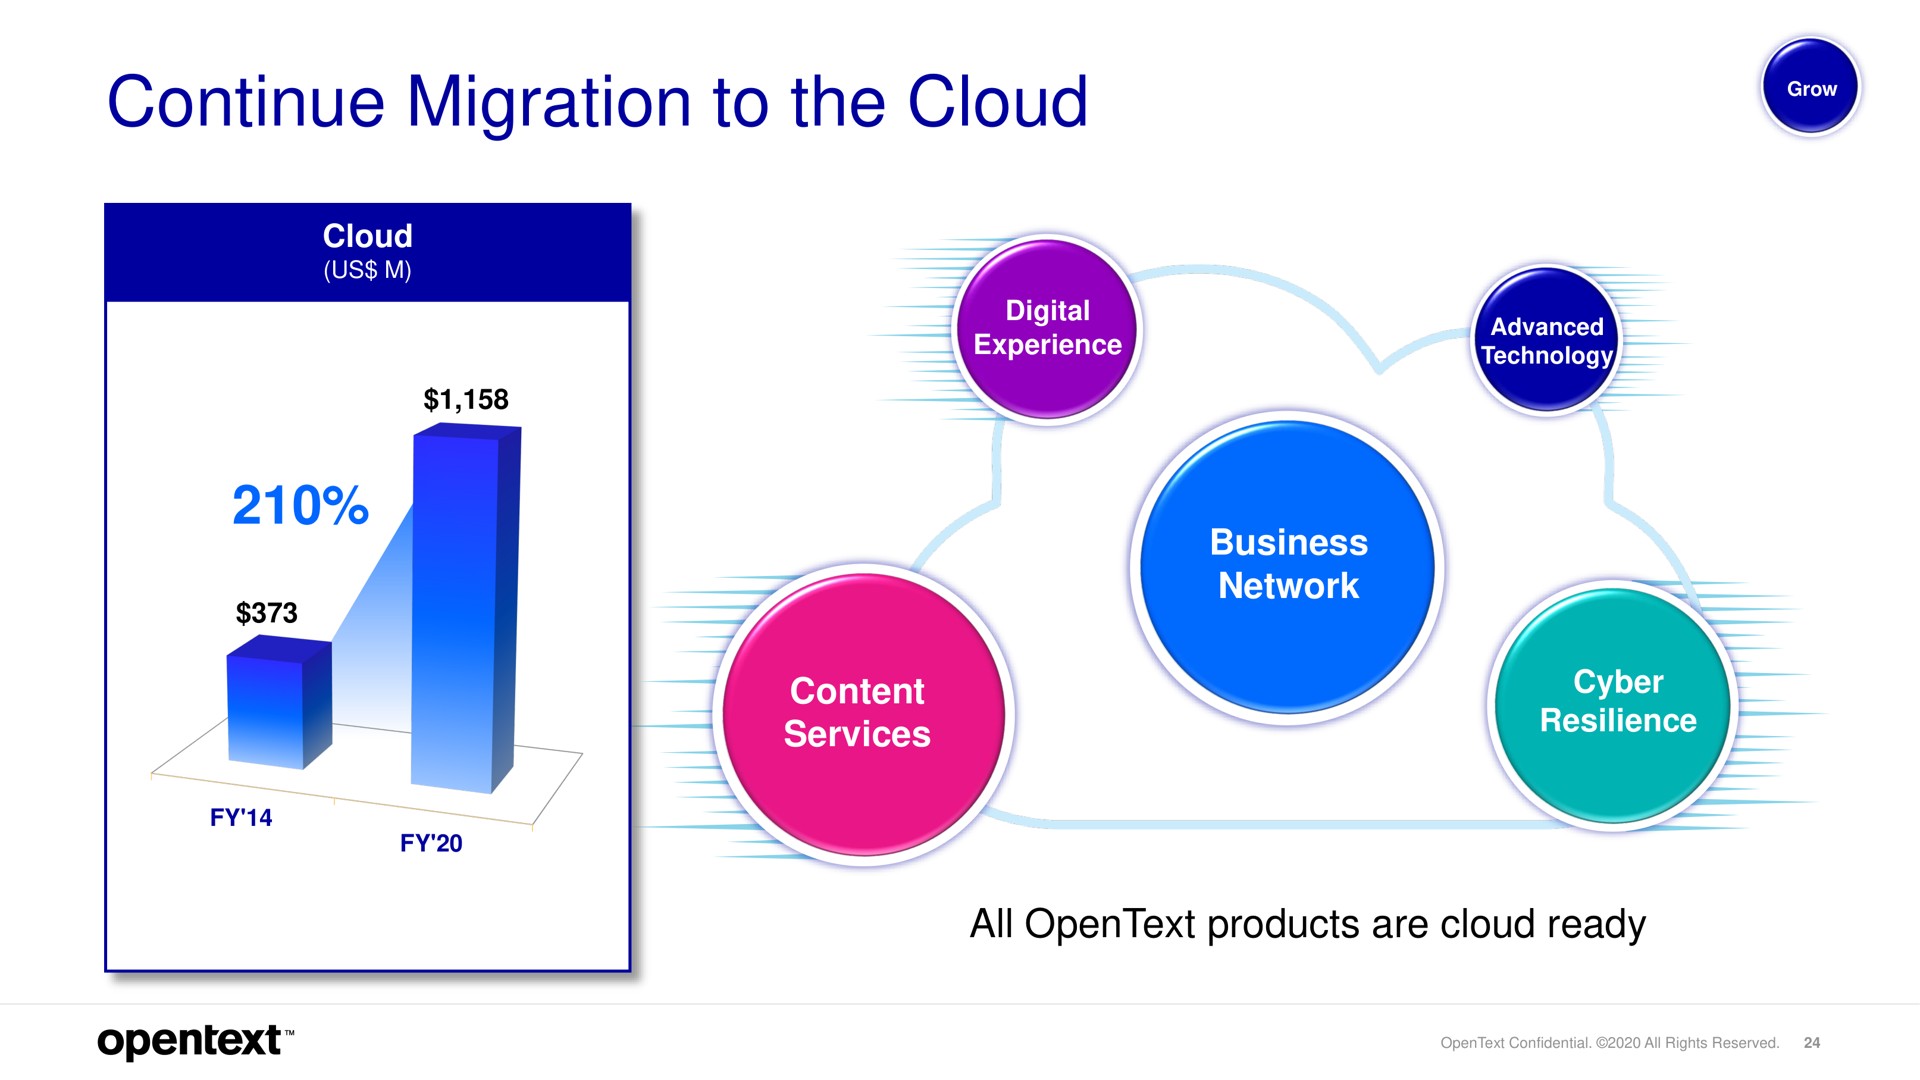 continue migration to the cloud | OpenText